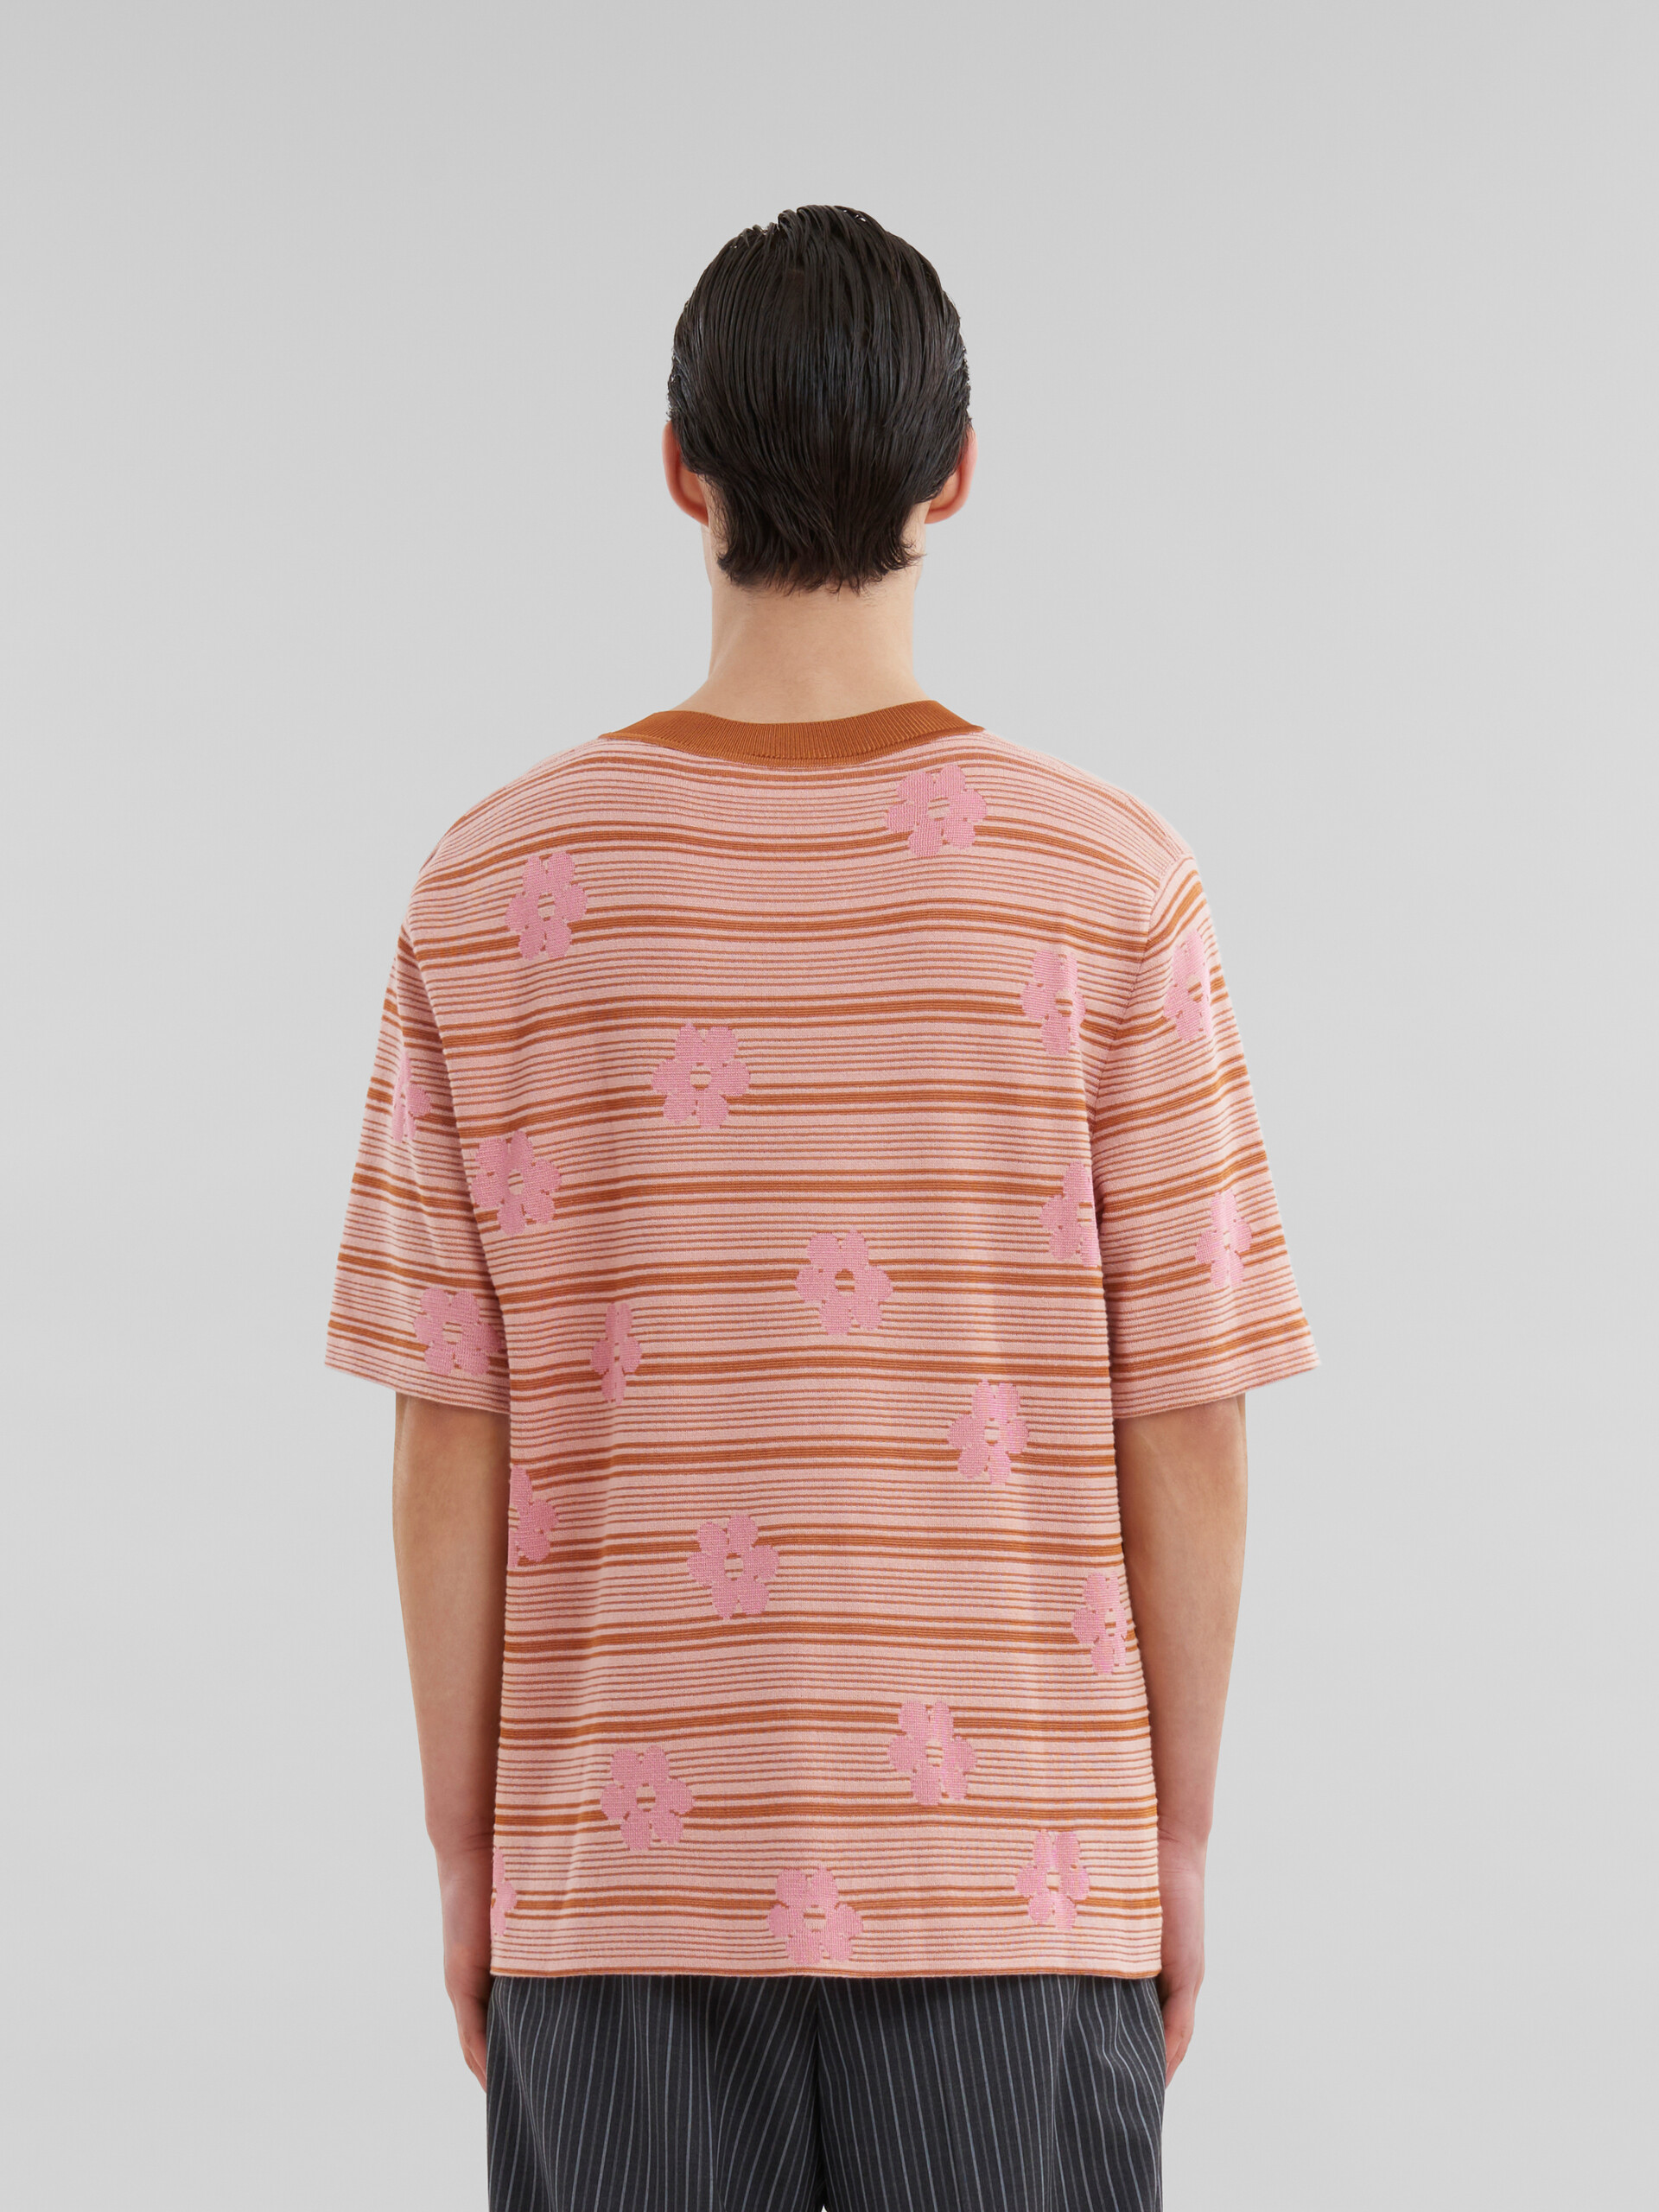 Pink cotton-viscose striped knit T-shirt with floral motif - Pullovers - Image 3